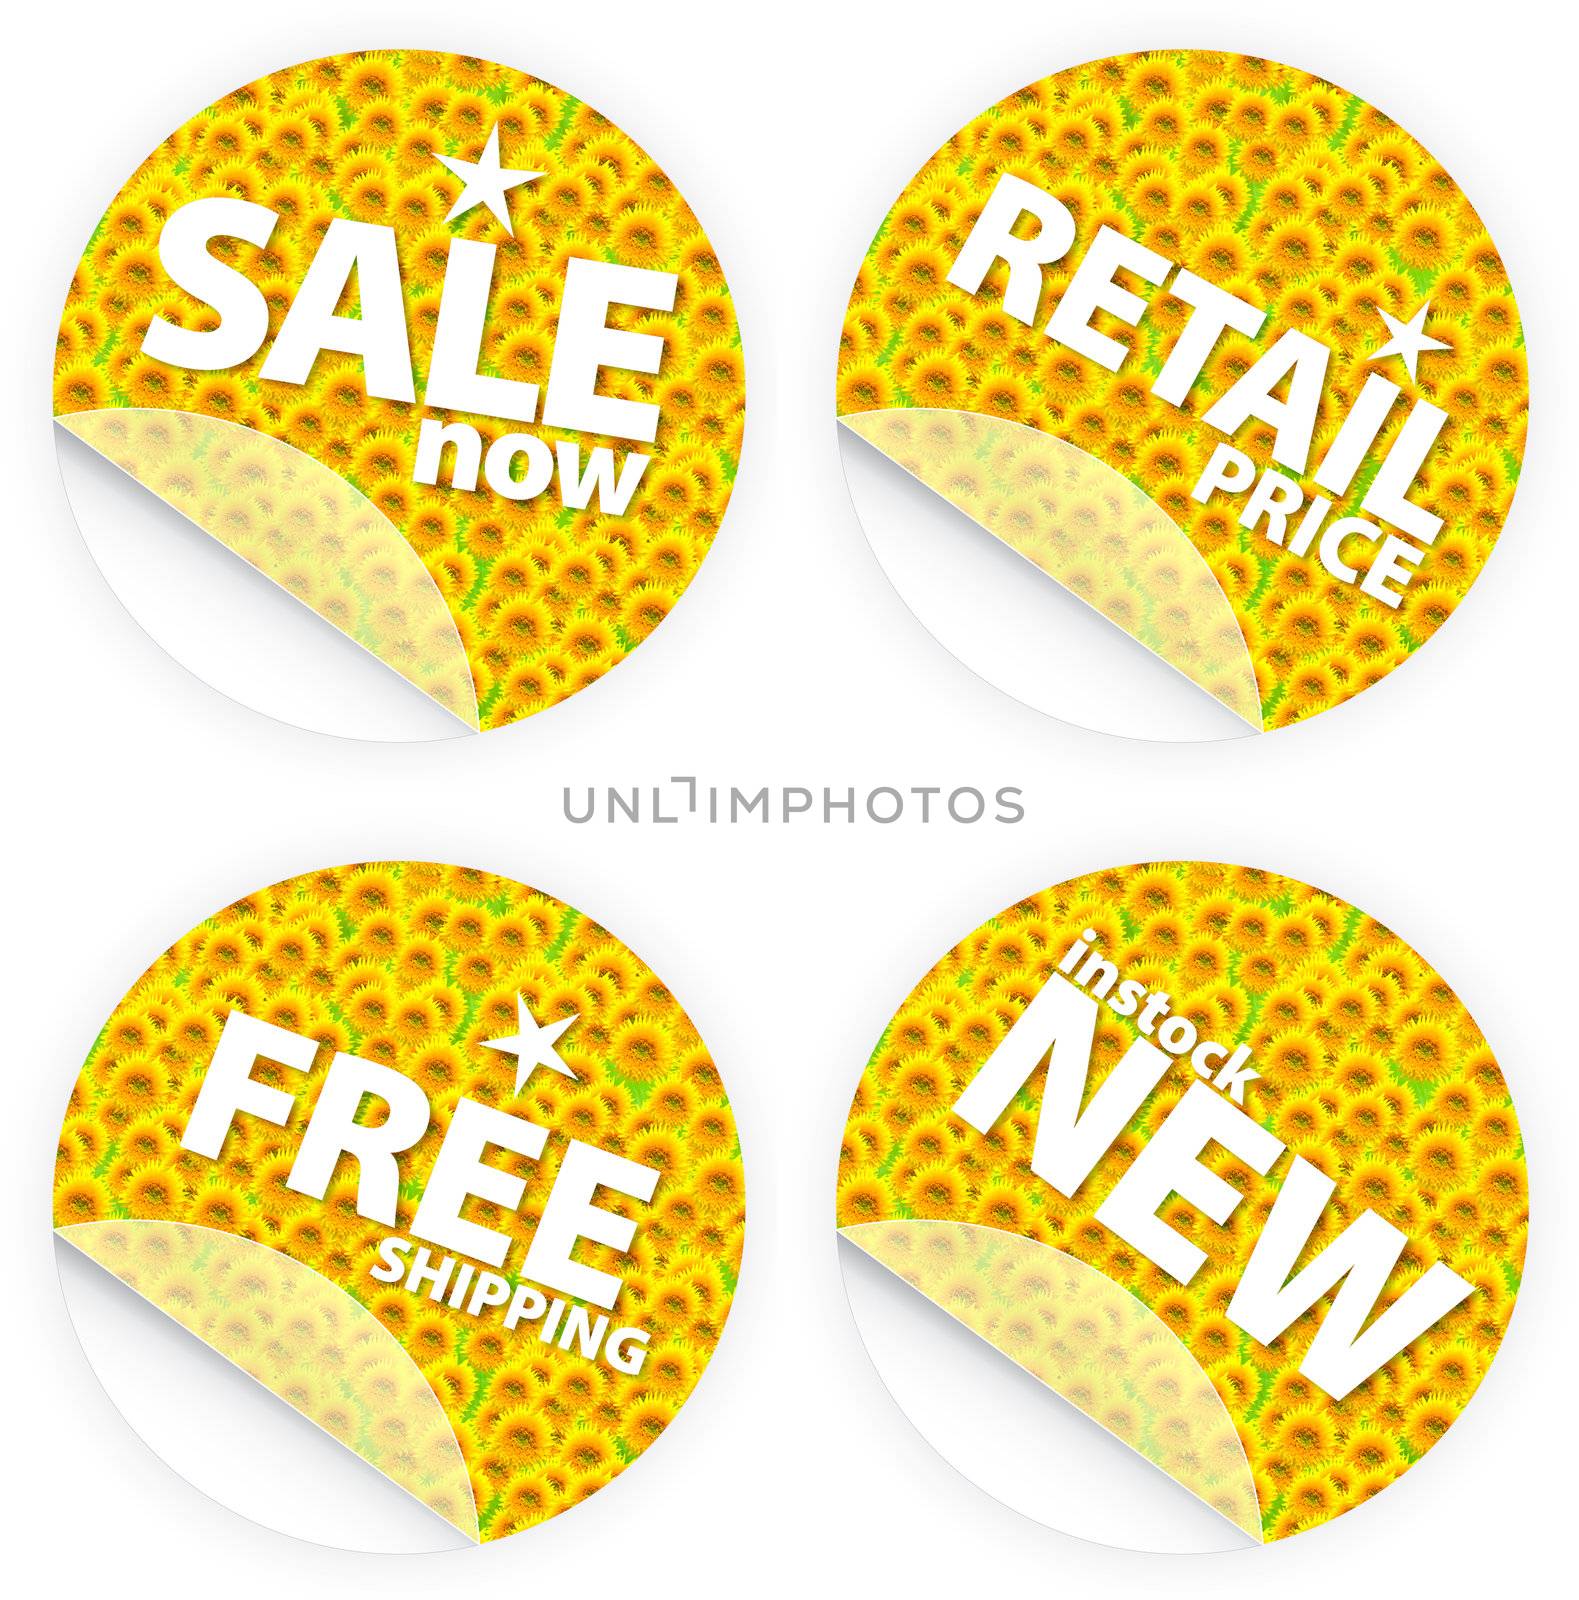 Illustration of beautiful sunflower retail stickers. Themes include sales, free shipping, retail price and new item in stock. Set 3.